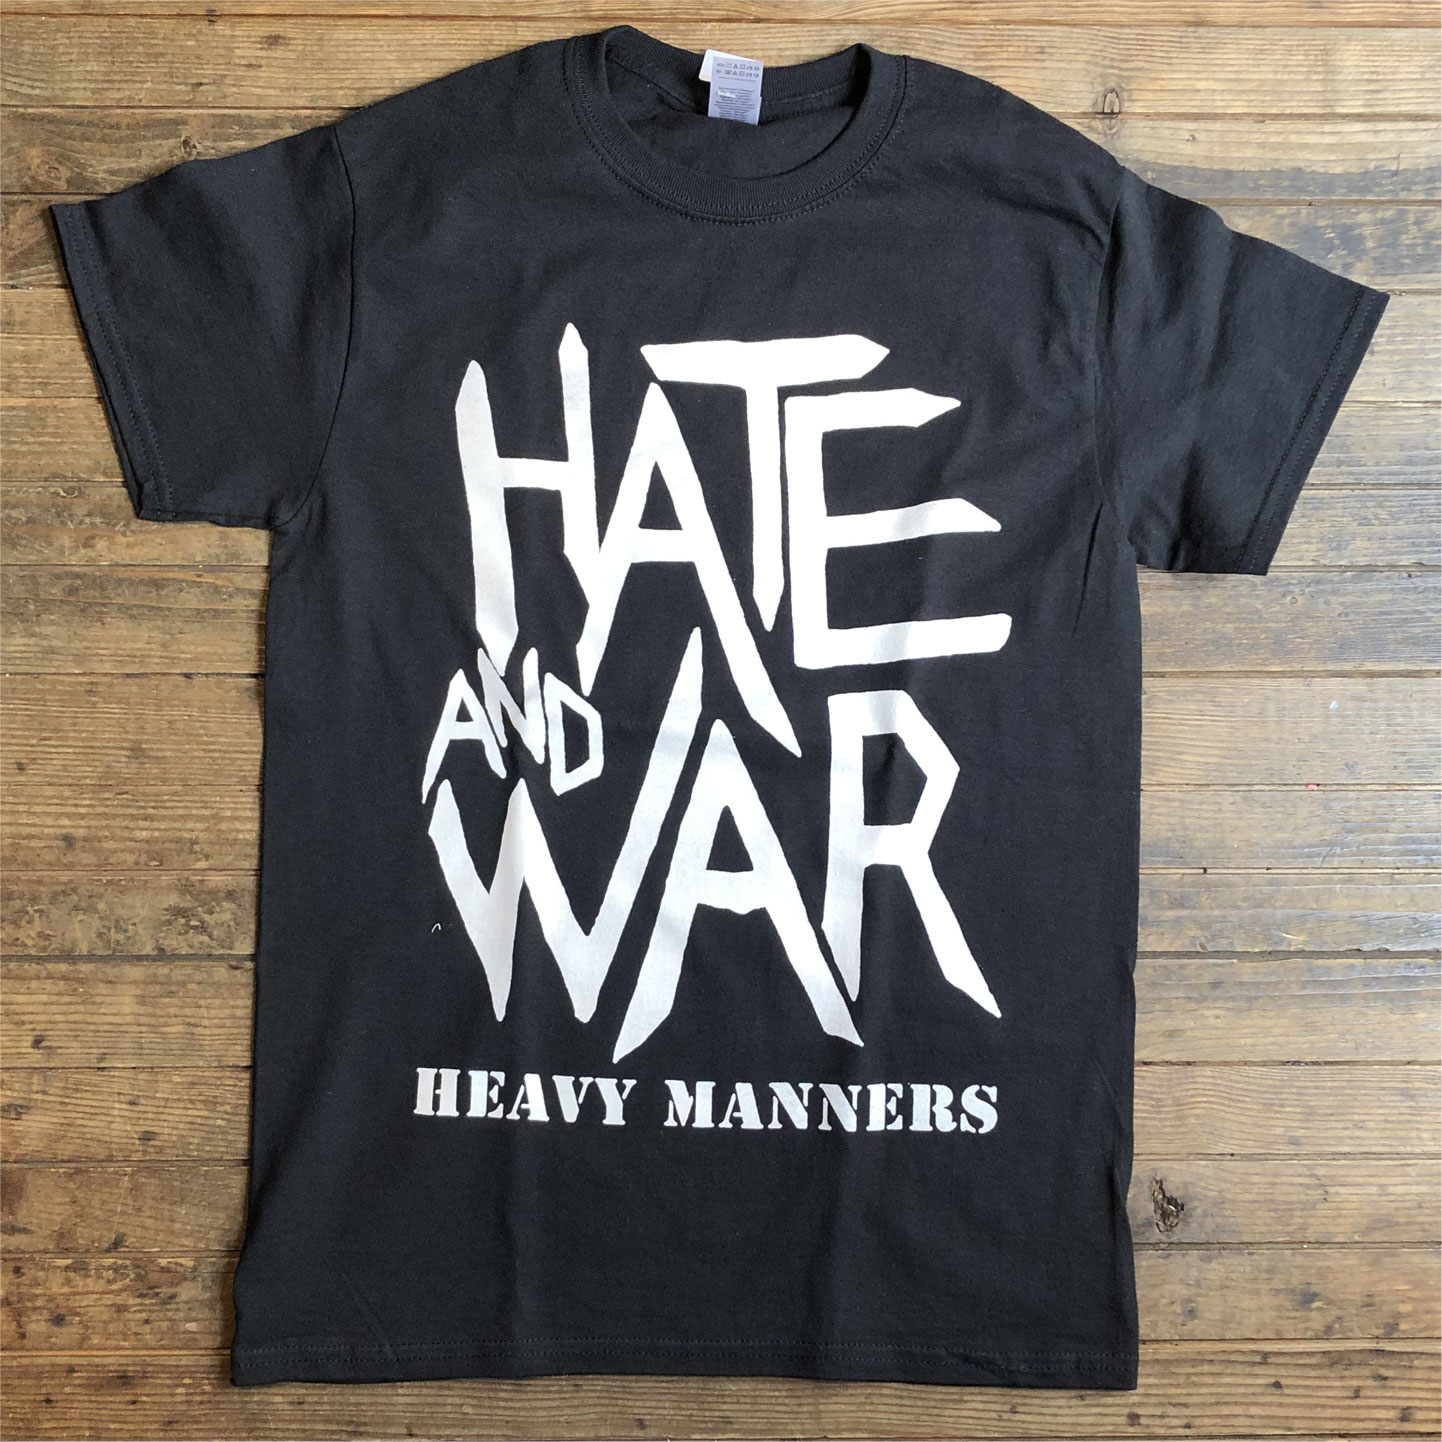 THE CLASH Tシャツ HATE AND WAR